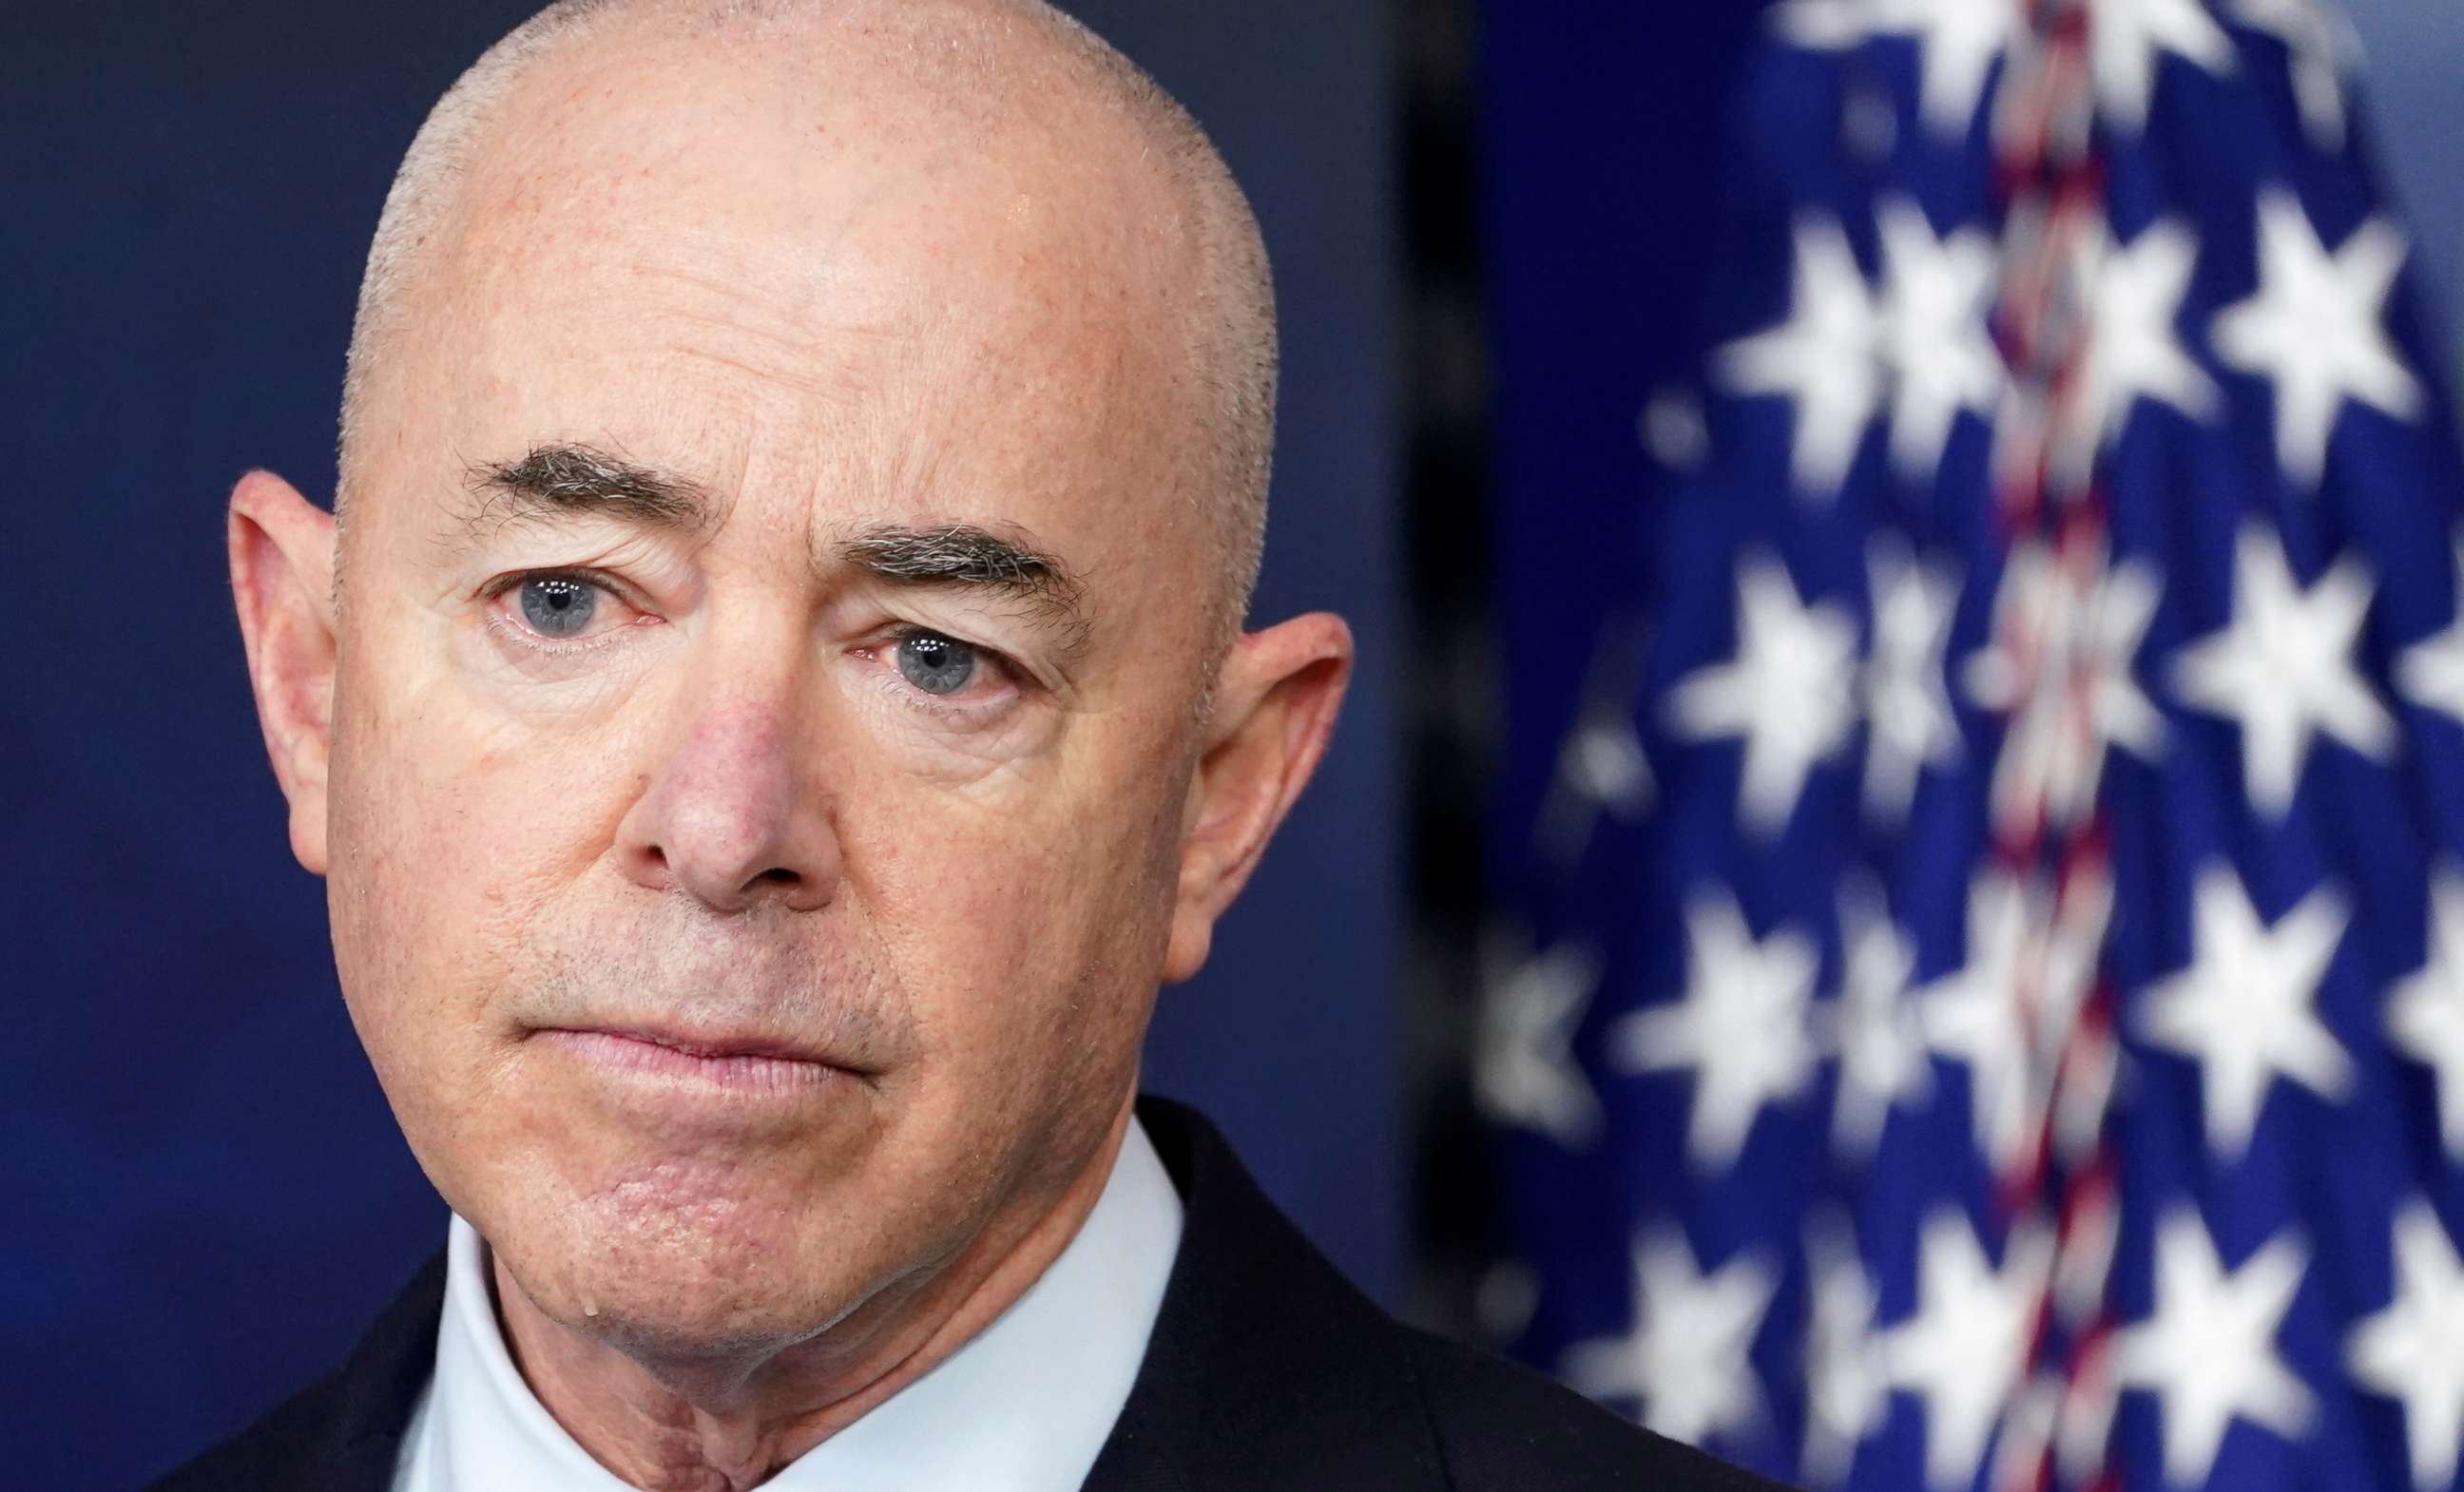 FILE PHOTO: U.S. Department of Homeland Security Secretary Alejandro Mayorkas holds a press briefing at the White House in Washington, U.S., March 1, 2021. REUTERS/Kevin Lamarque/File Photo